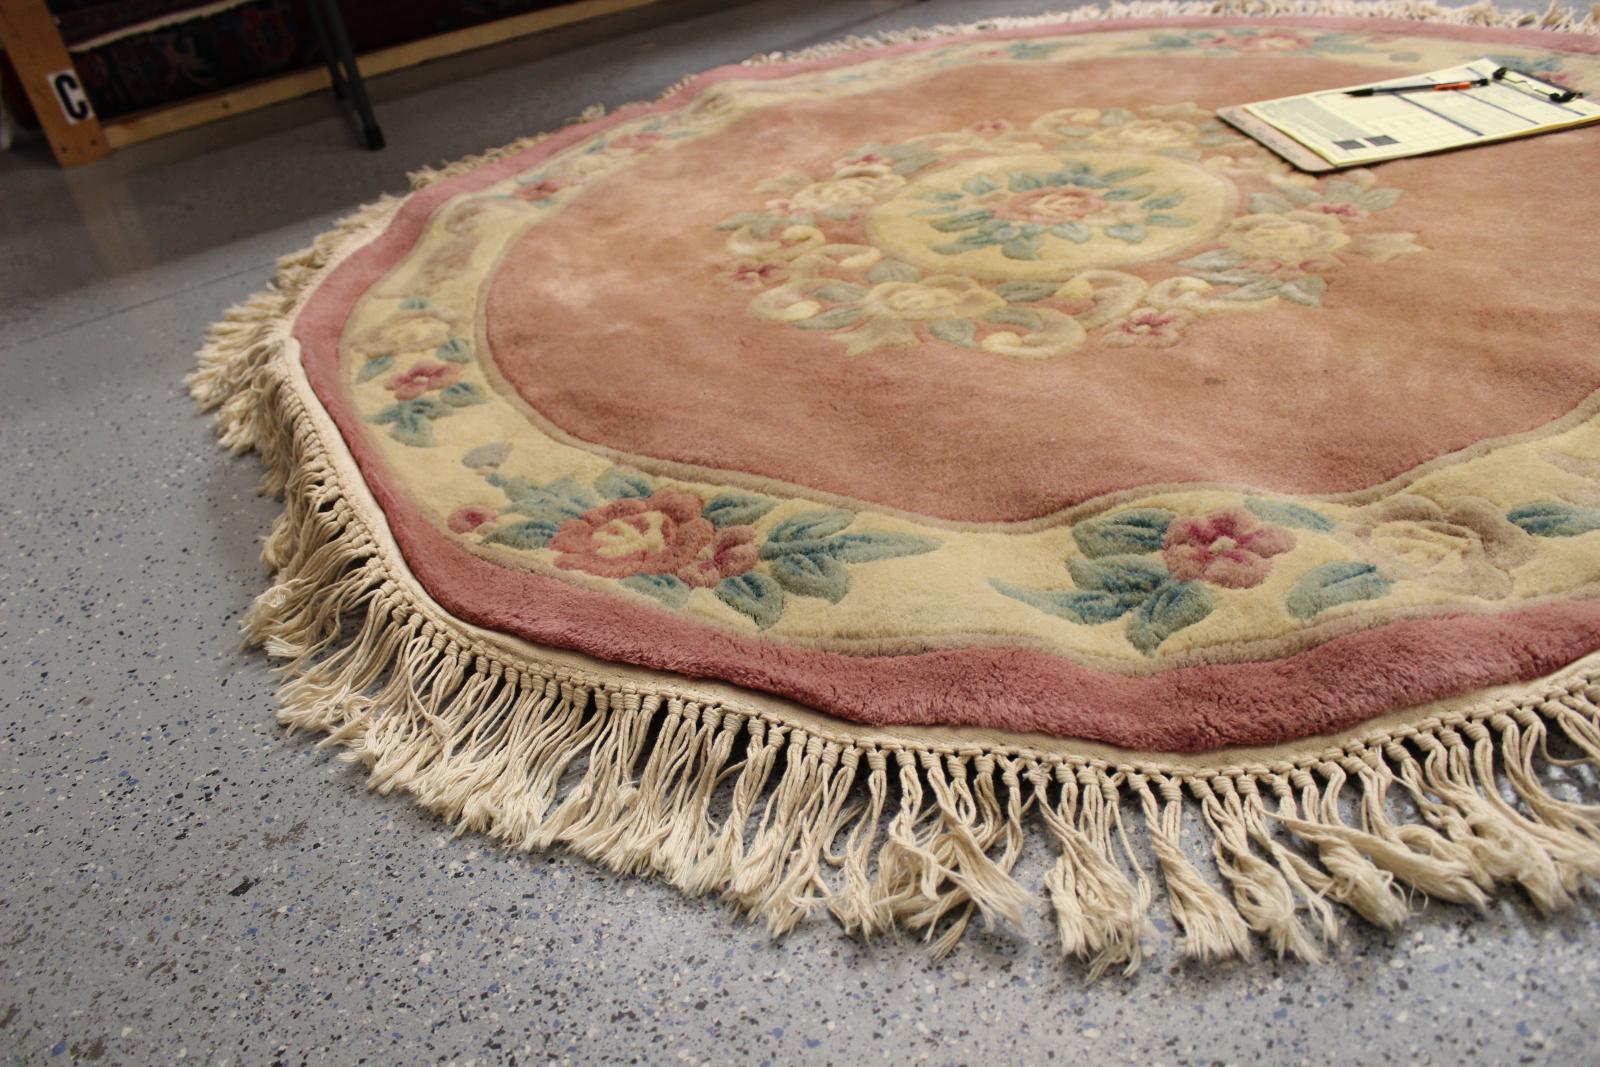 Prescott Valley Rug Cleaning. Tips To Care For Rugs